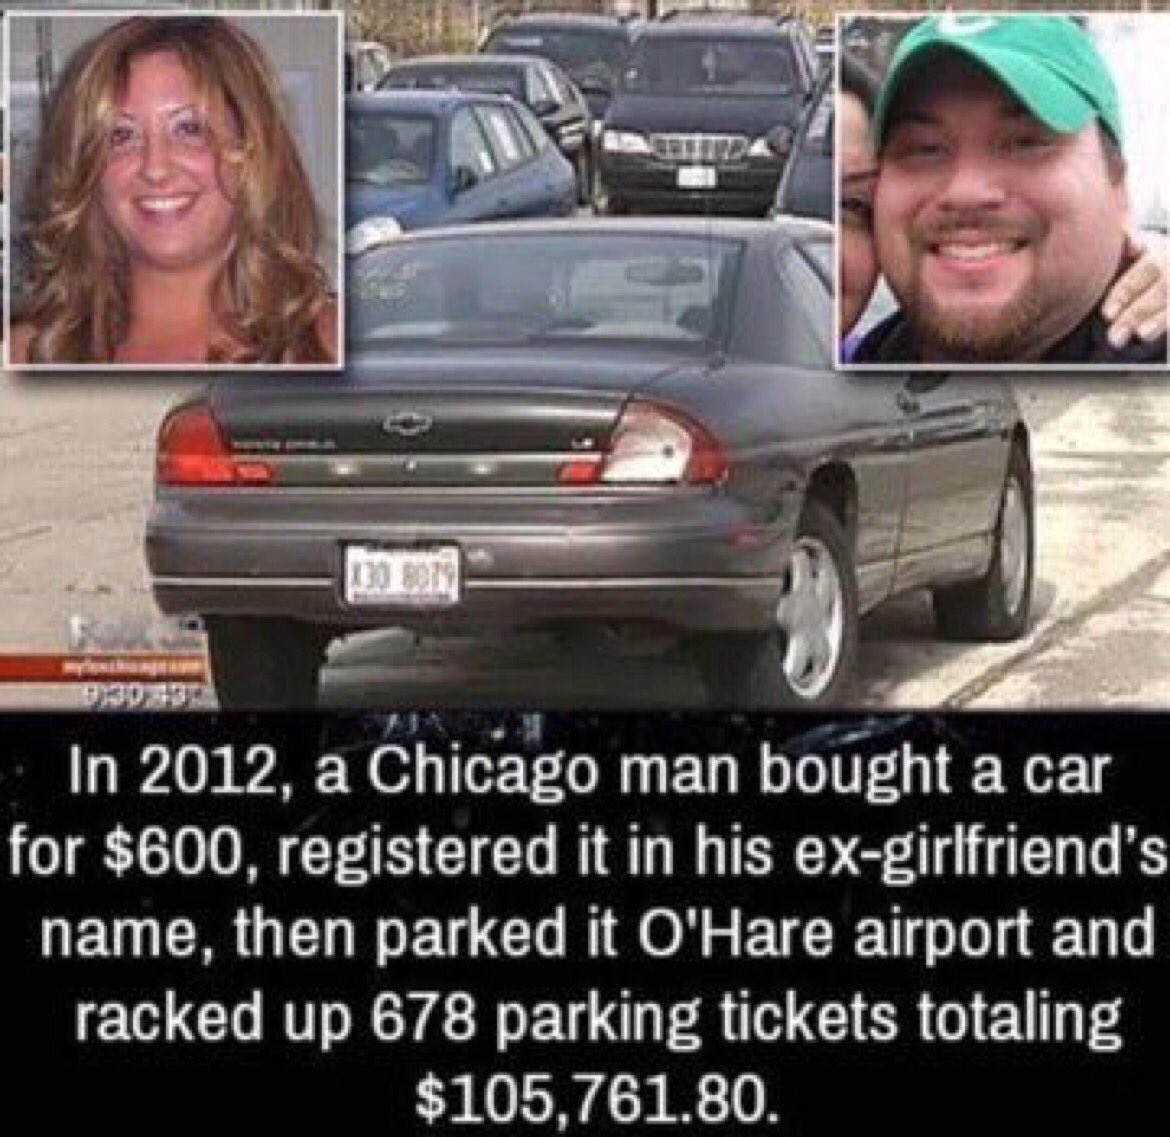 What The F Facts On Twitter A Chicago Man Bought A Car In His Ex Girlfriend S Name And After The Breakup Abandoned It Illegally Parked In O Hare Airport The Car Then